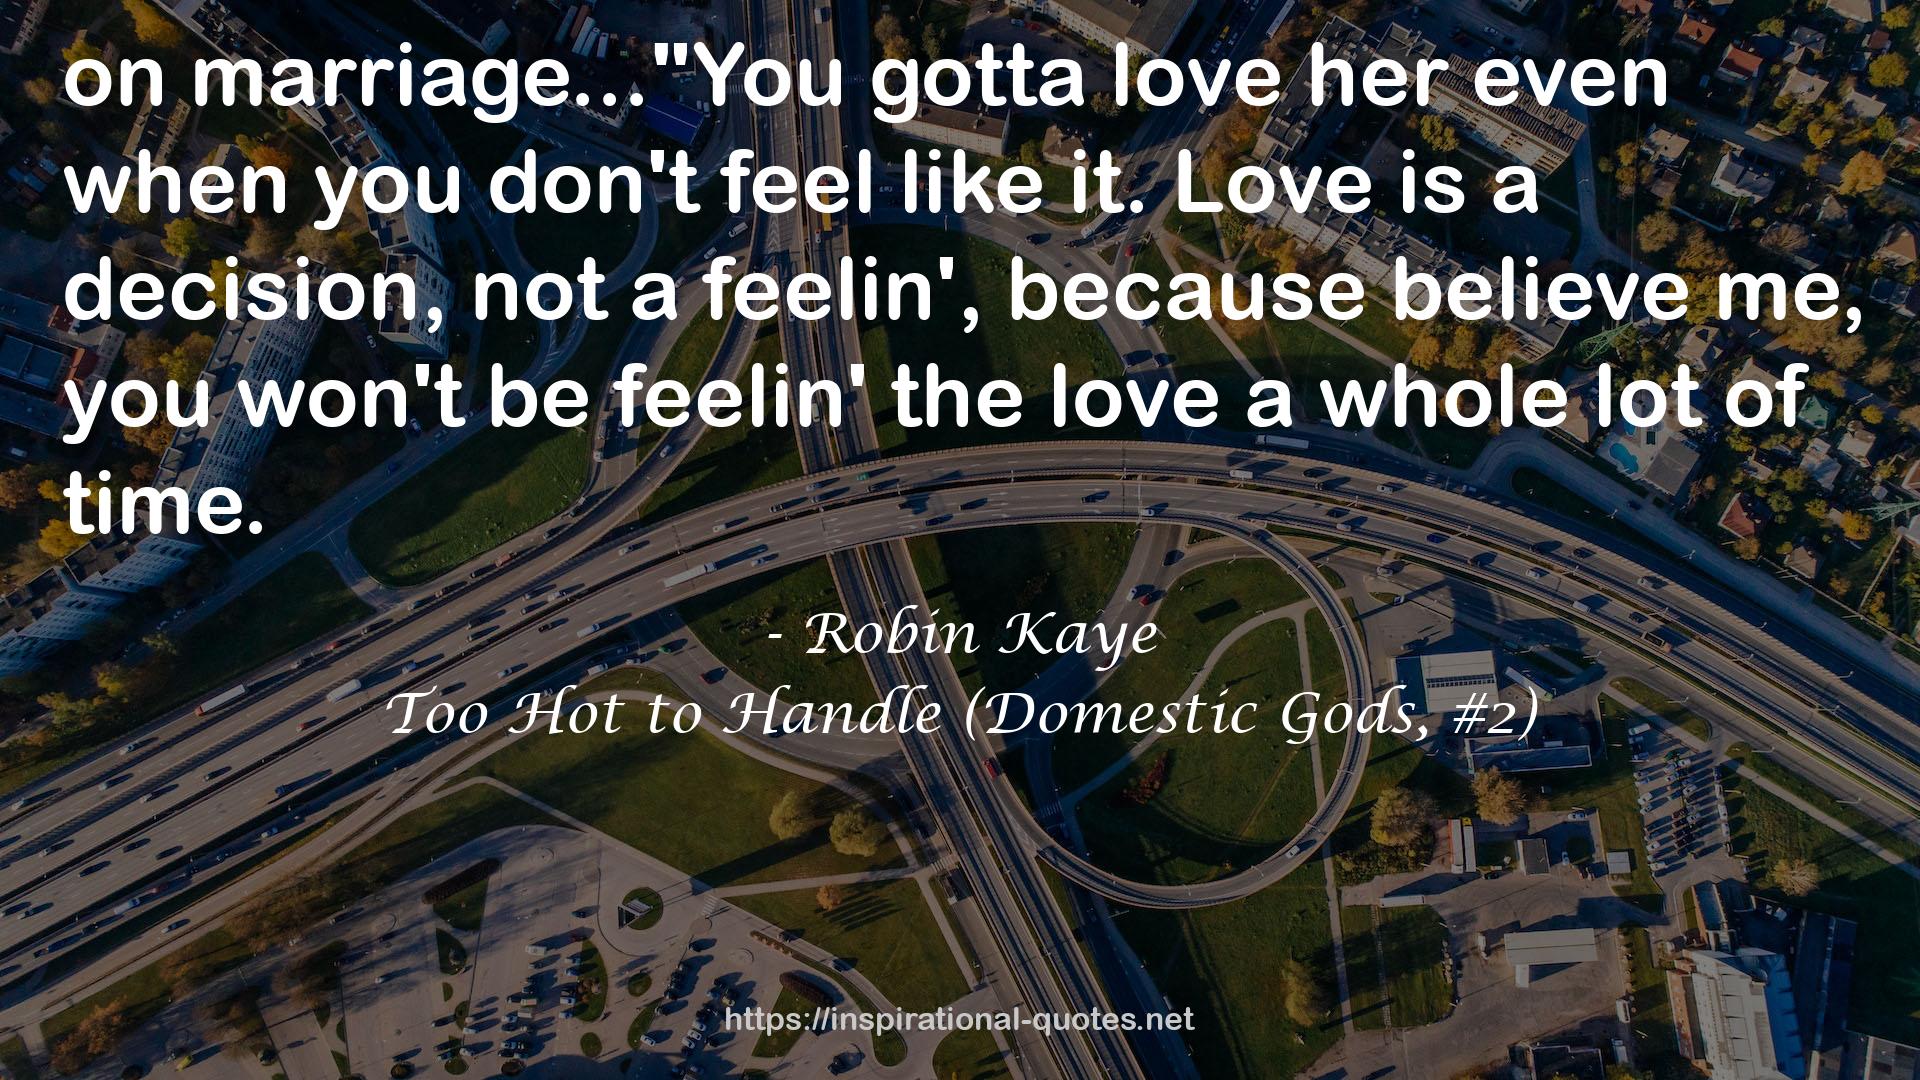 Too Hot to Handle (Domestic Gods, #2) QUOTES